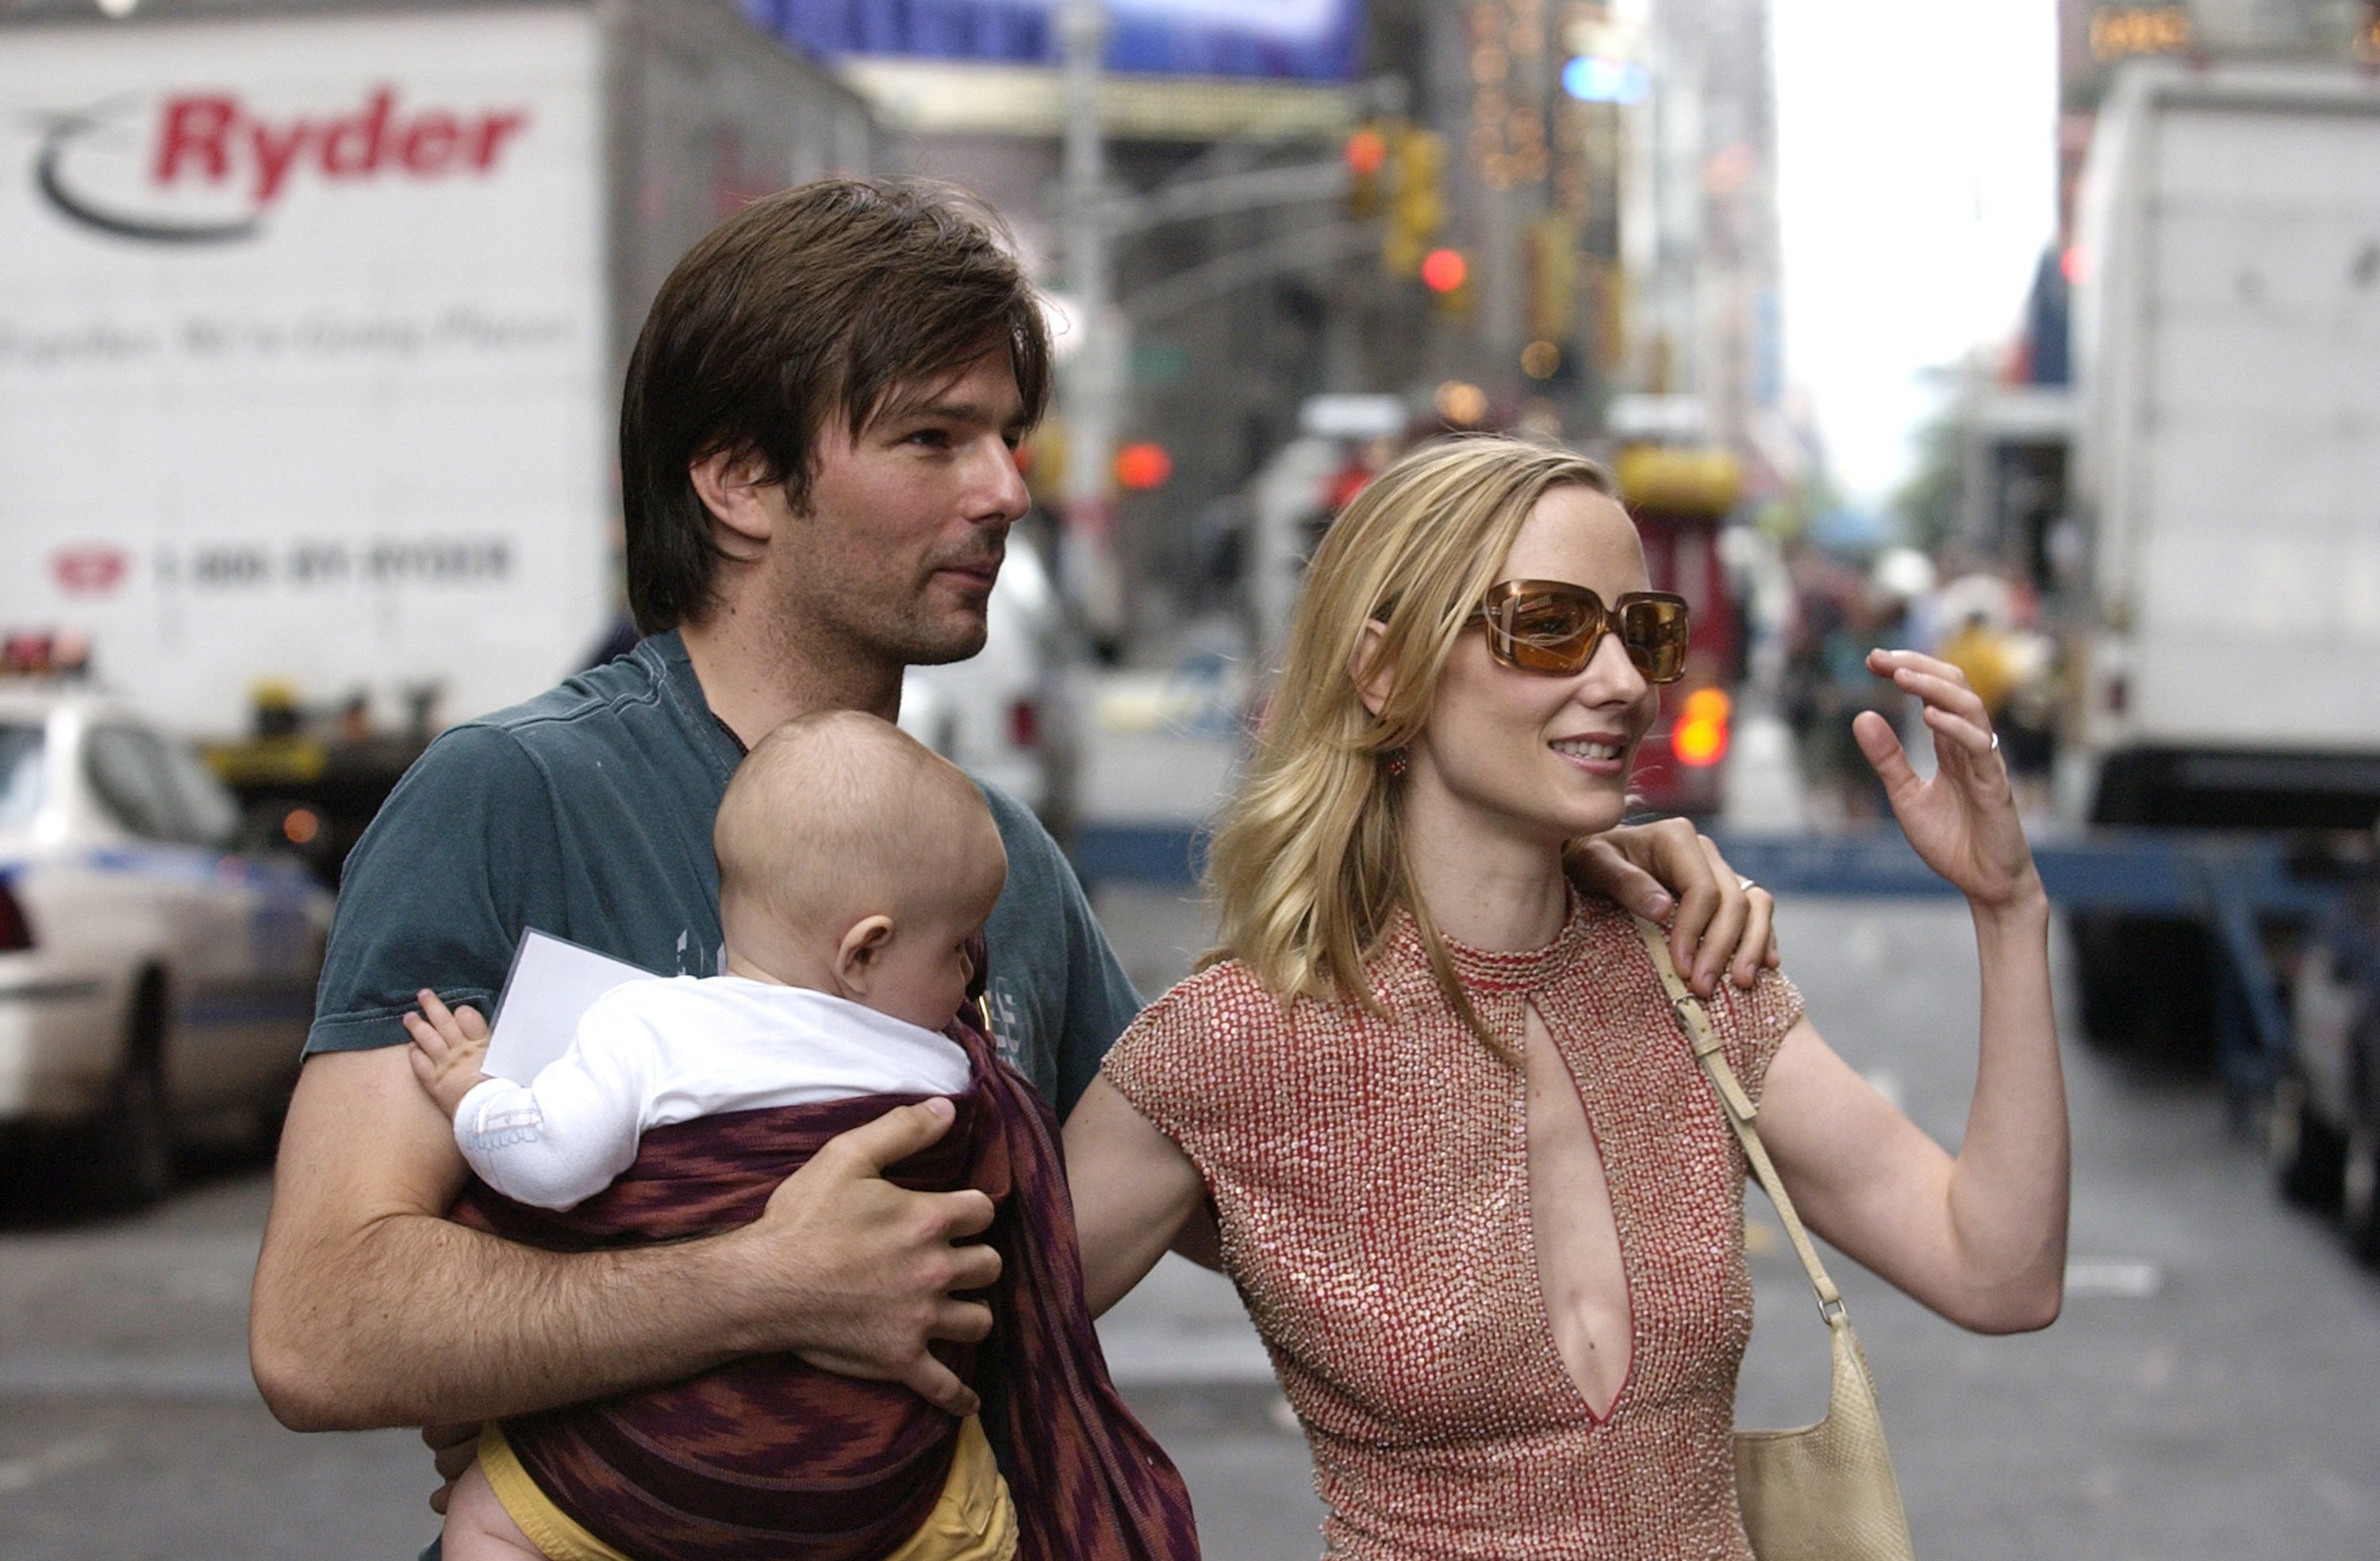 Anne Heche and Coley Laffoon with their child leaving "Broadway on Broadway"  in New York City | Source: Getty Images